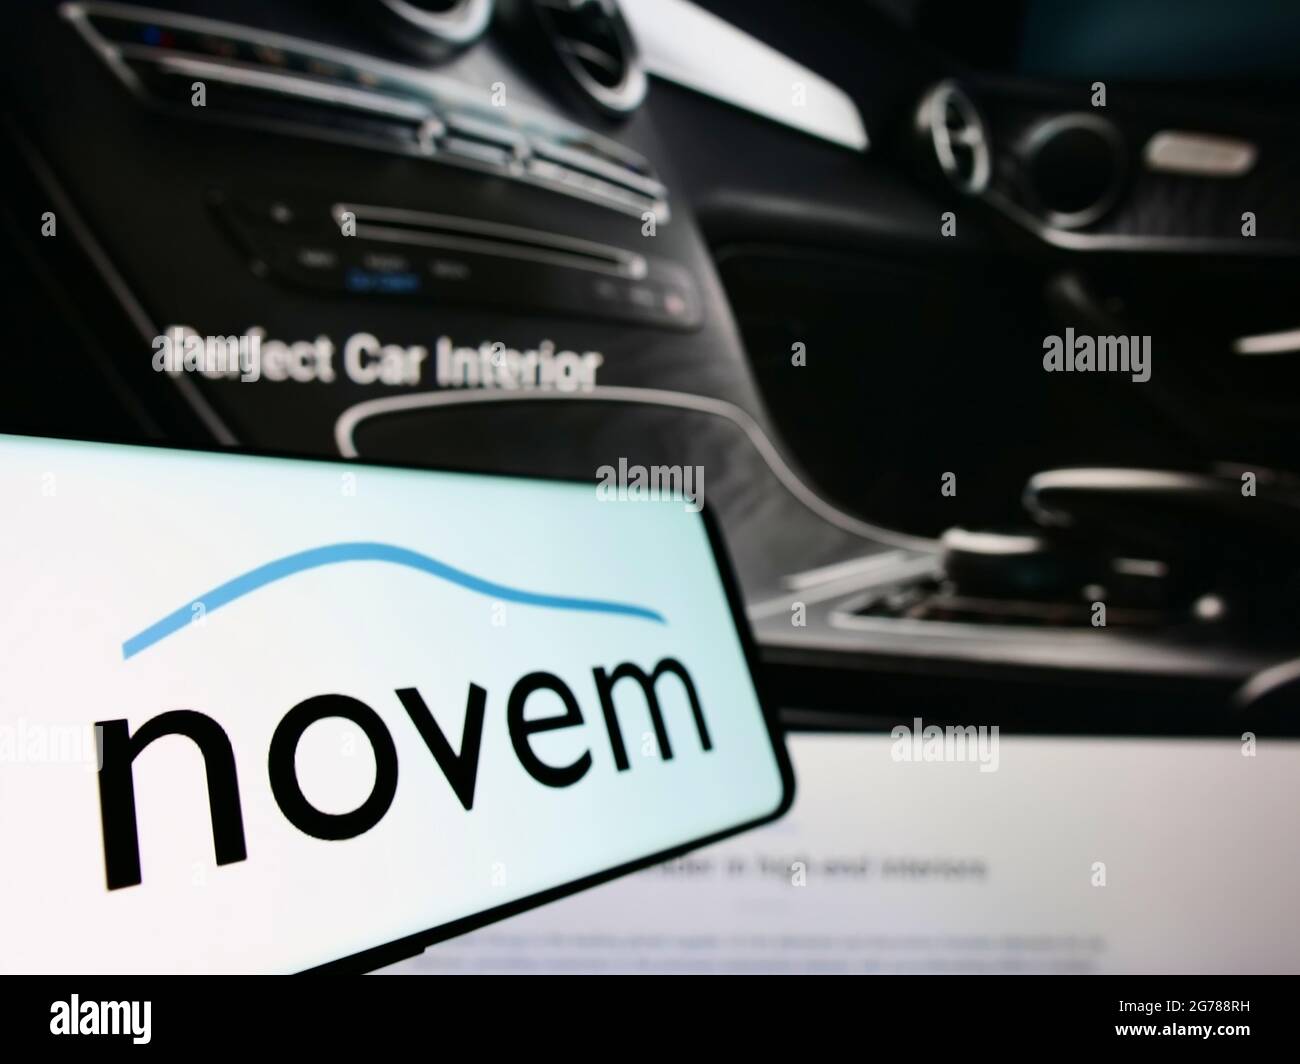 Cellphone with logo of German automotive supplier Novem Car Interior Design on screen in front of website. Focus on center-left of phone display. Stock Photo